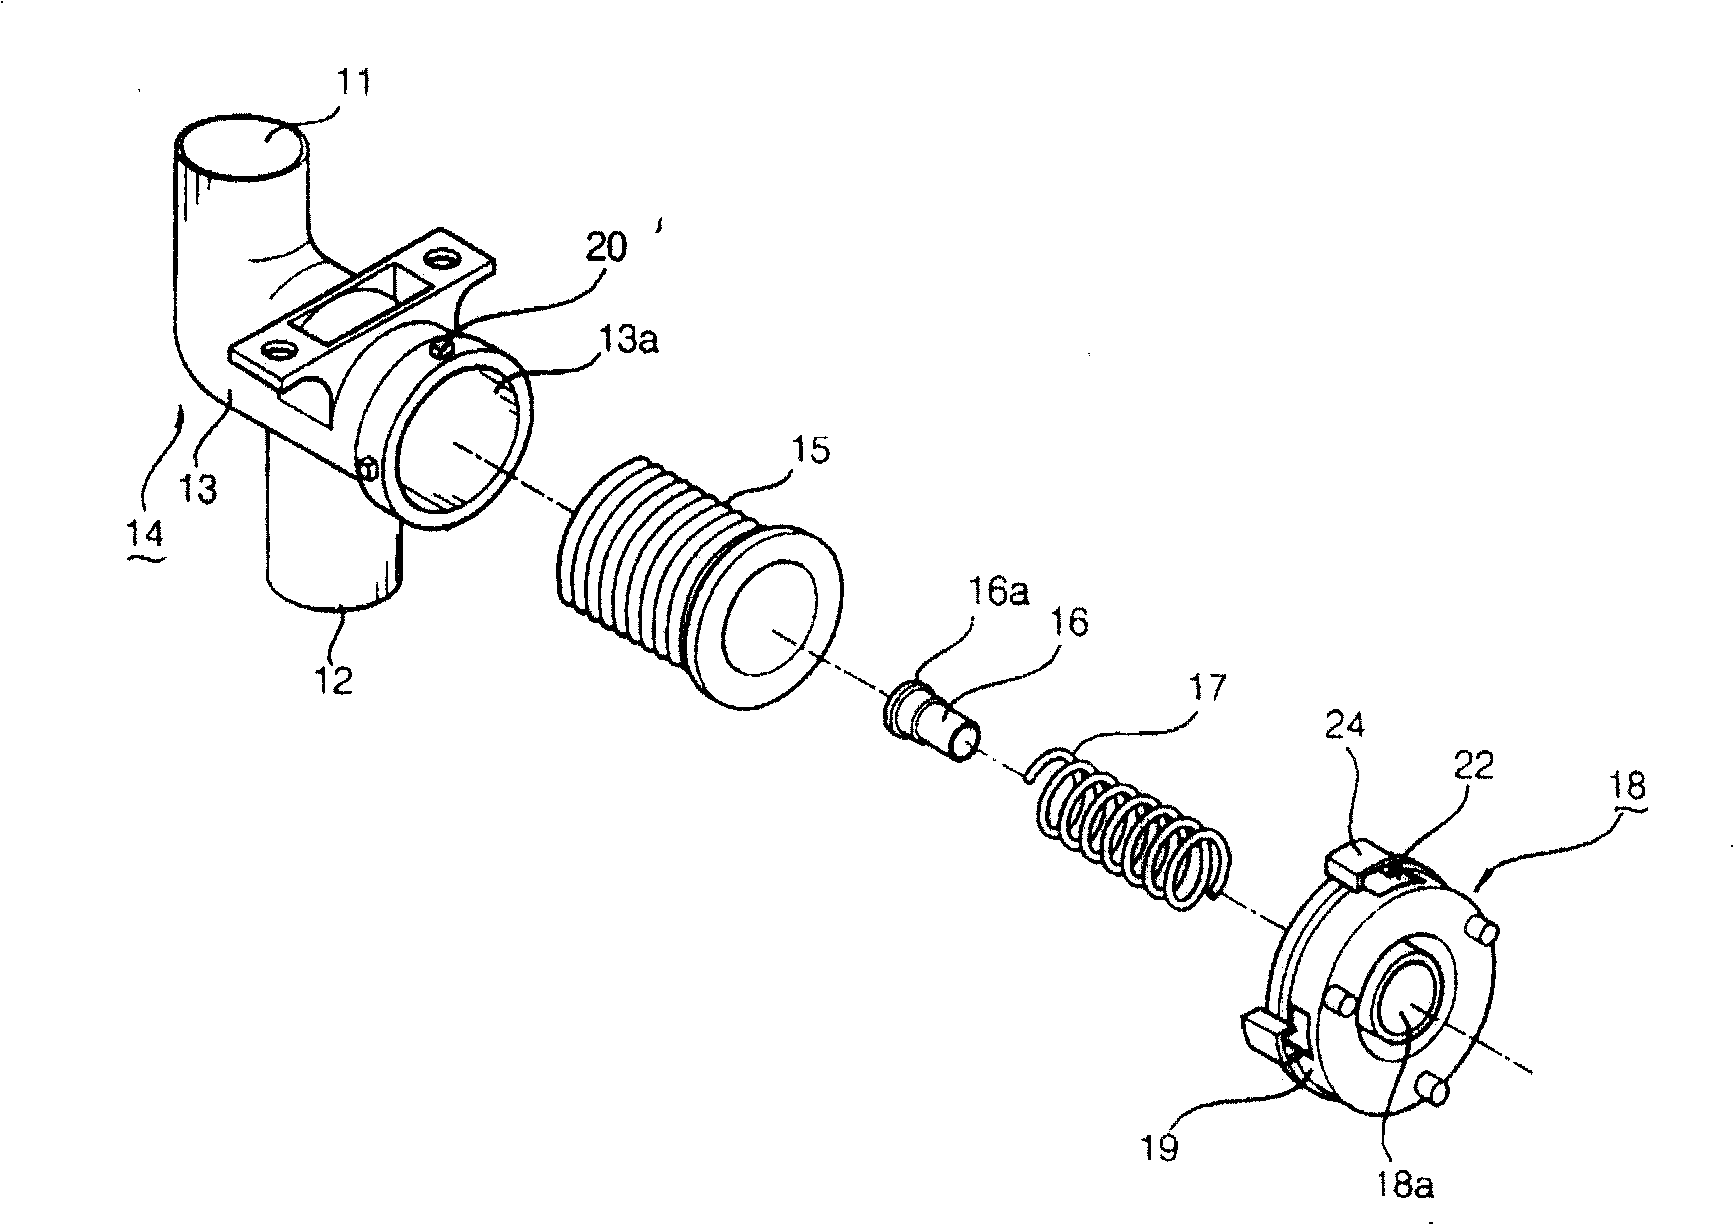 Connection structure of draining valve for washer